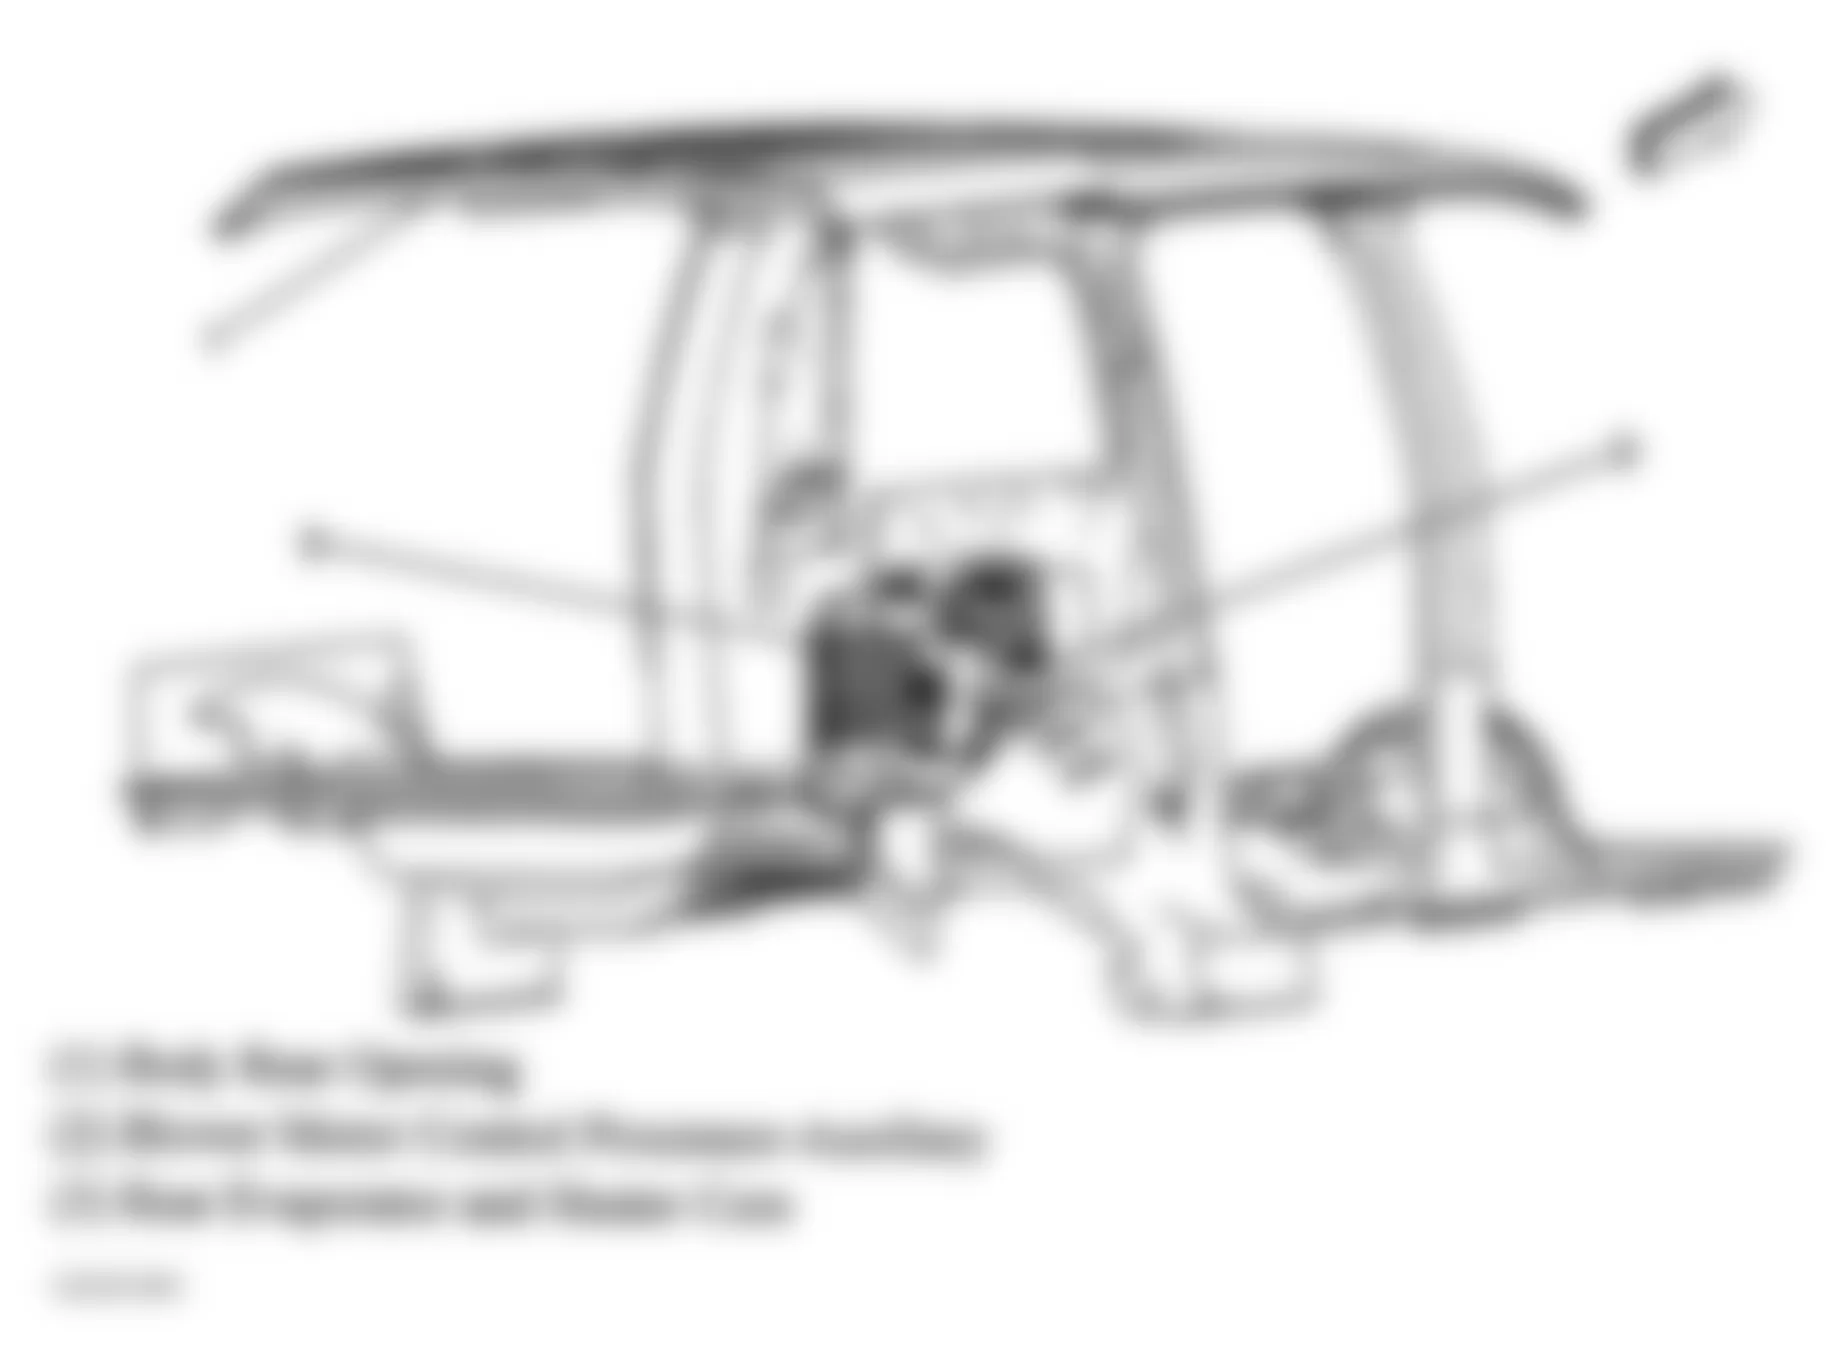 GMC Envoy XL 2006 - Component Locations -  Right Rear Of Vehicle